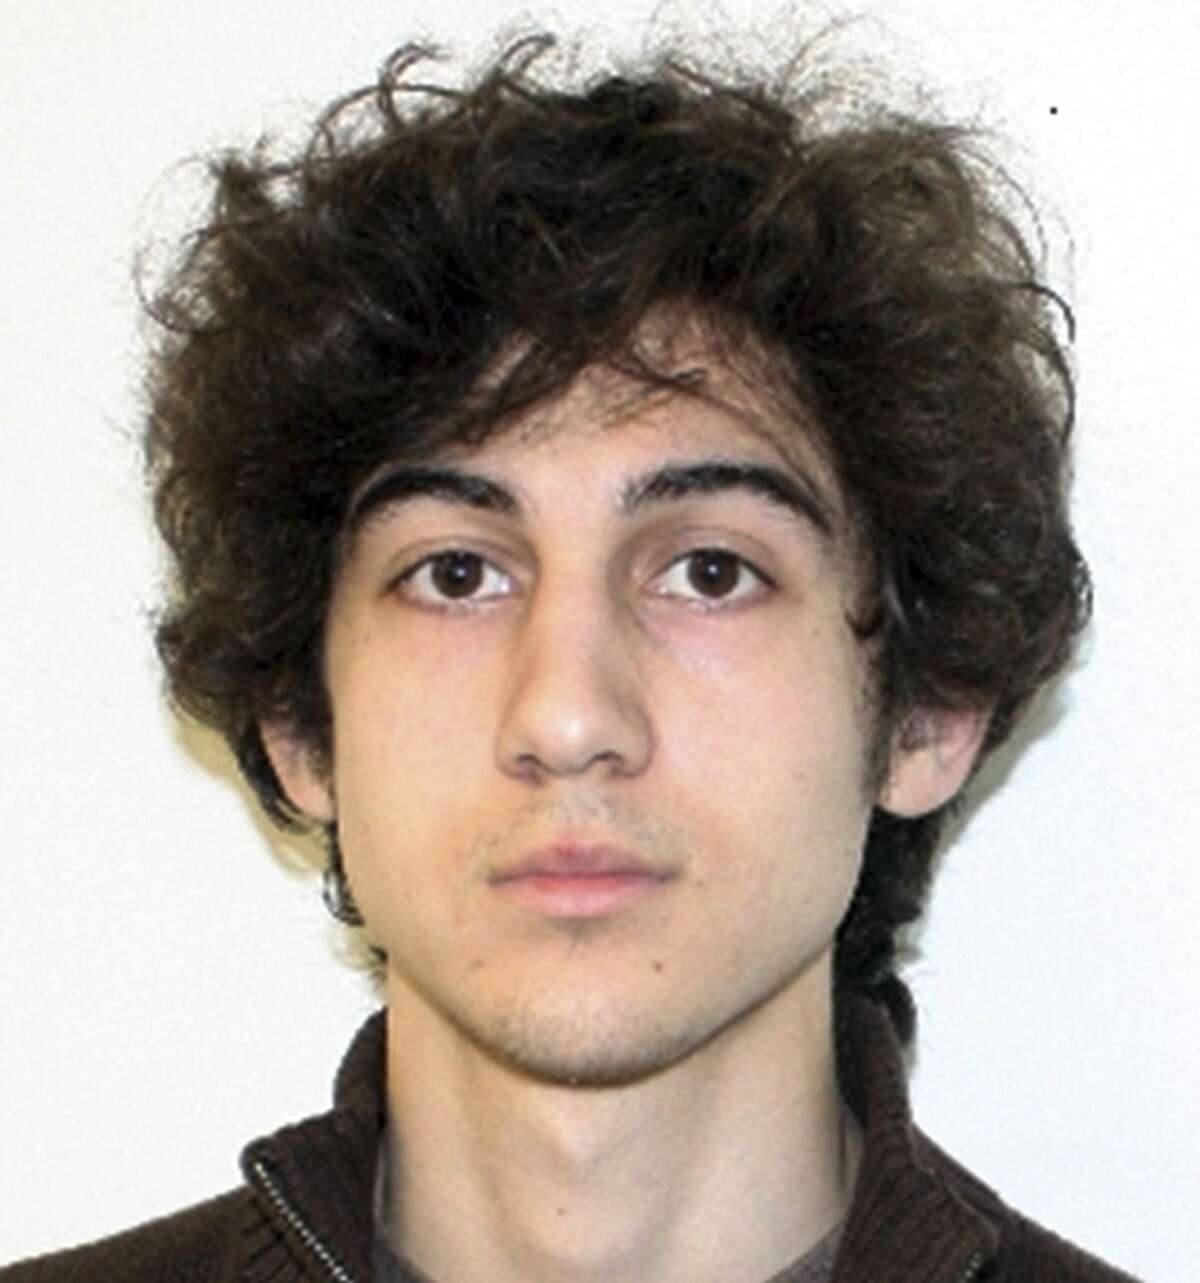 This undated file photo released by the FBI shows Dzhokhar Tsarnaev, convicted Wednesday in federal court in Boston on multiple charges in the 2013 Boston Marathon bombings.